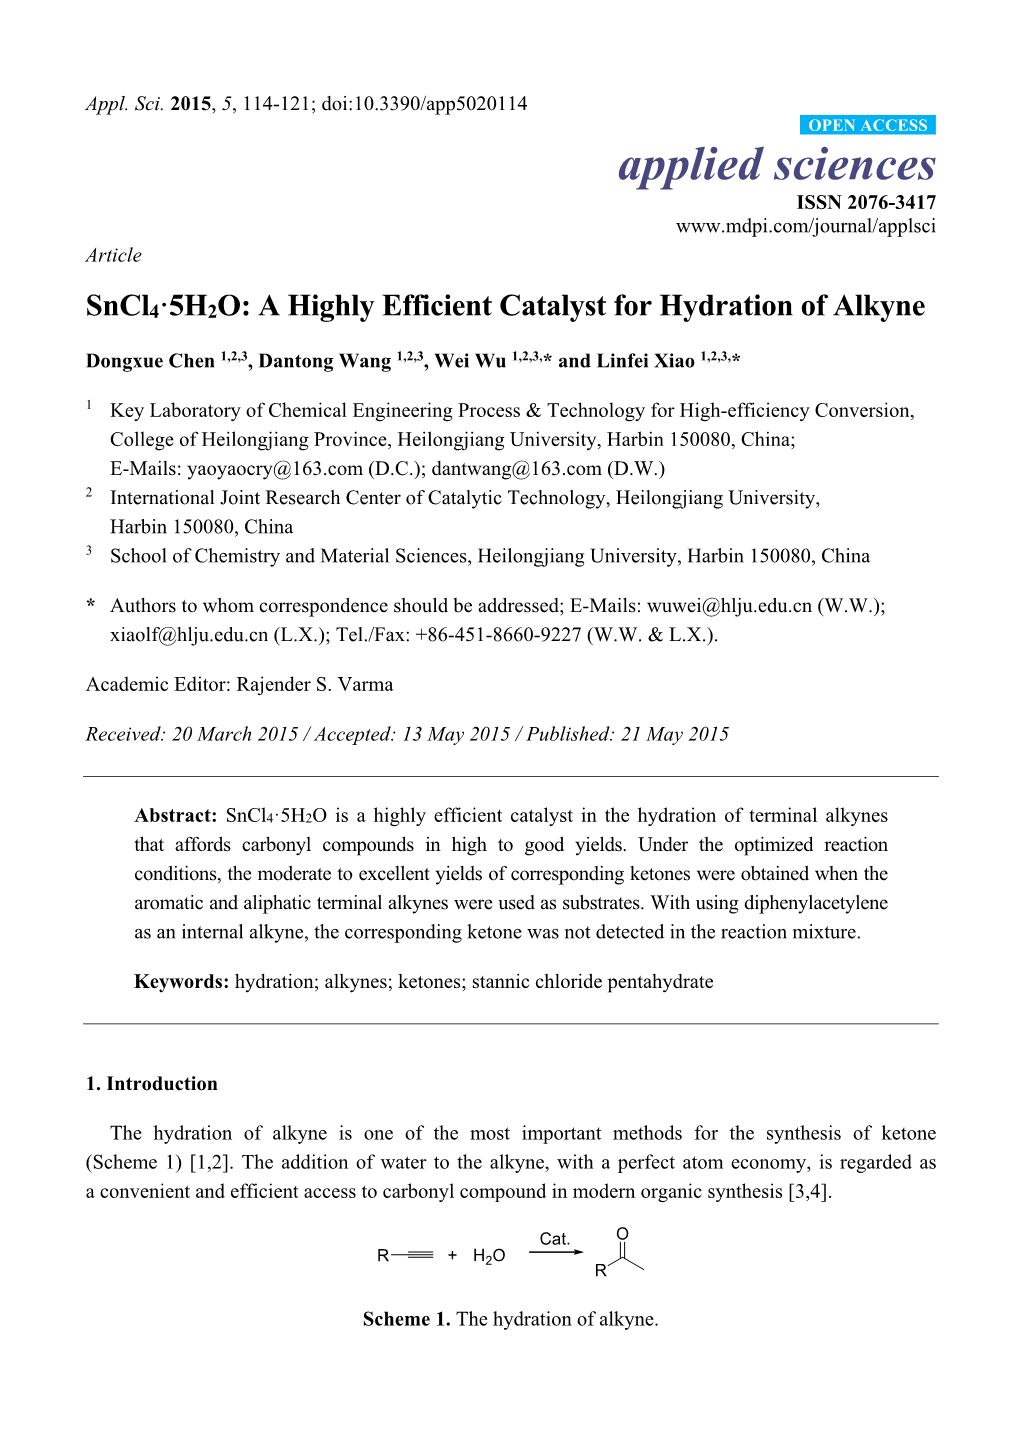 Sncl4·5H2O: a Highly Efficient Catalyst for Hydration of Alkyne